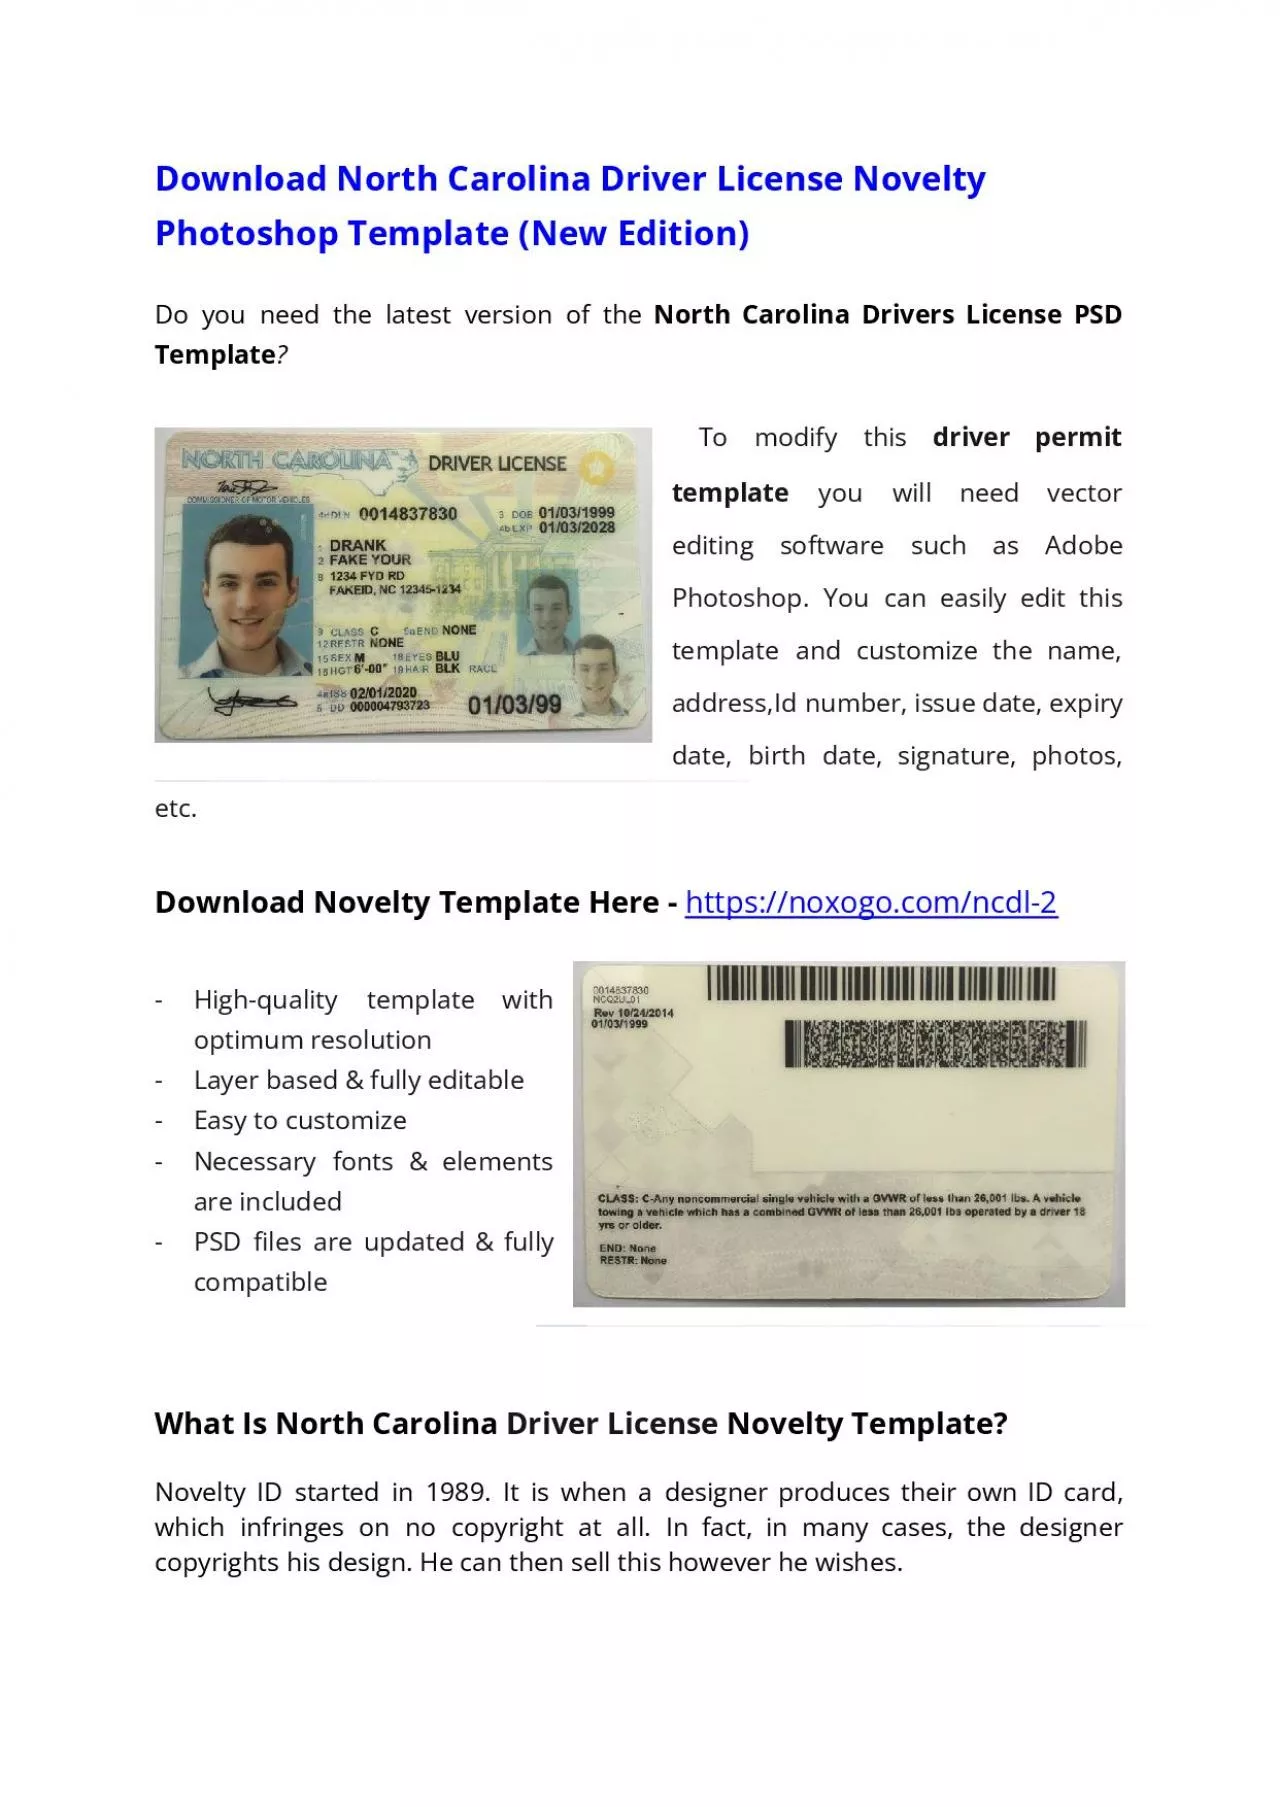 North Carolina Drivers License PSD Template (New Edition) – Download Photoshop File